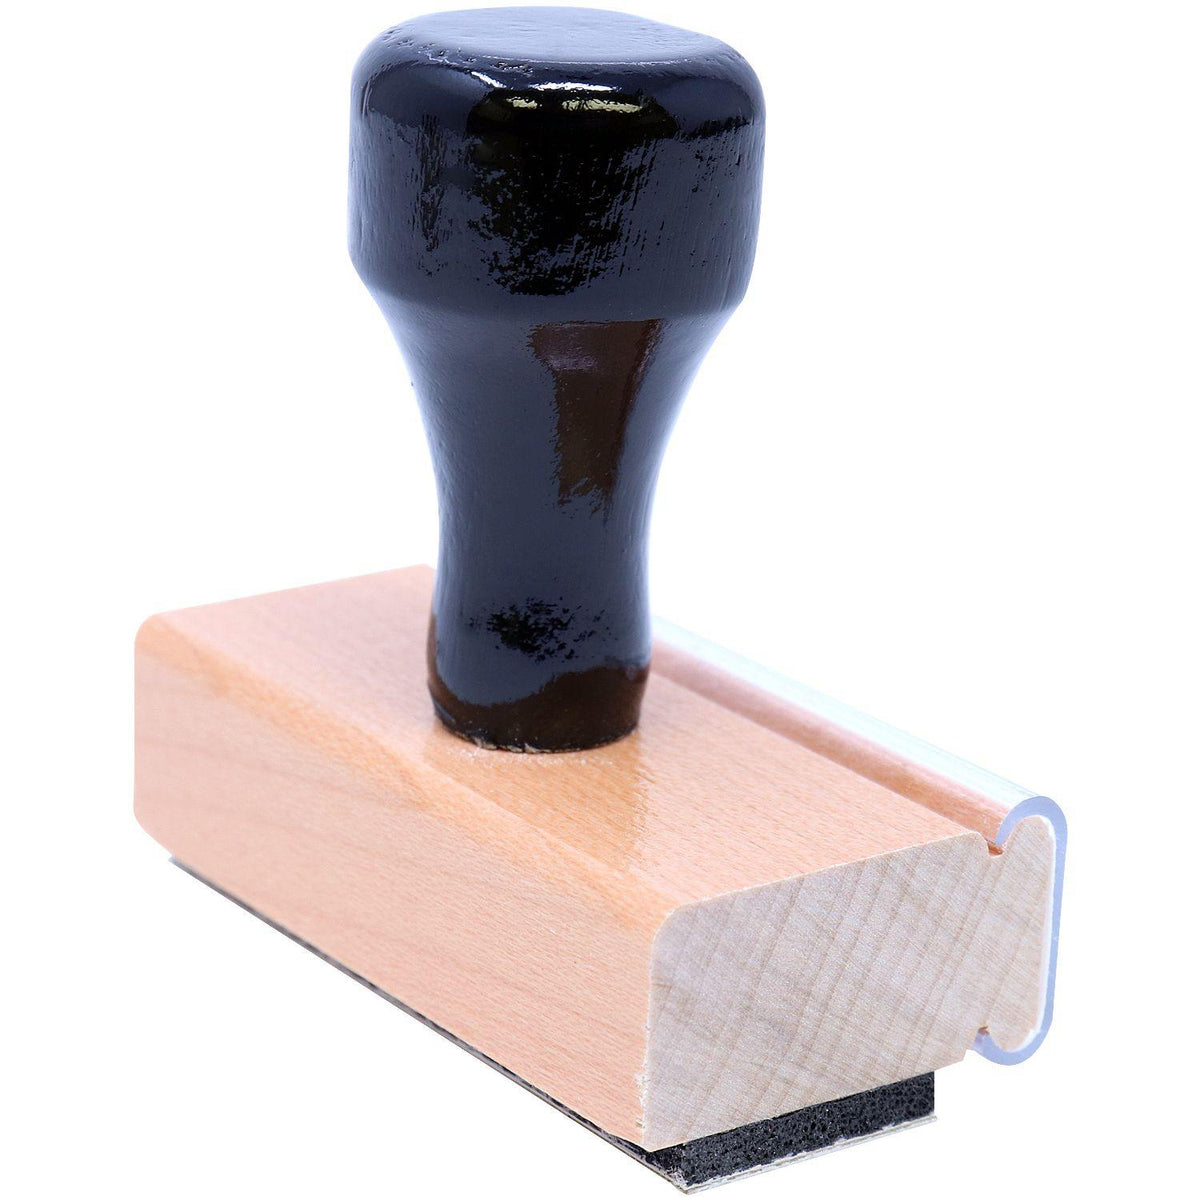 Large Urgente Rubber Stamp - Engineer Seal Stamps - Brand_Acorn, Impression Size_Large, Stamp Type_Regular Stamp, Type of Use_Office, Type of Use_Shipping &amp; Receiving